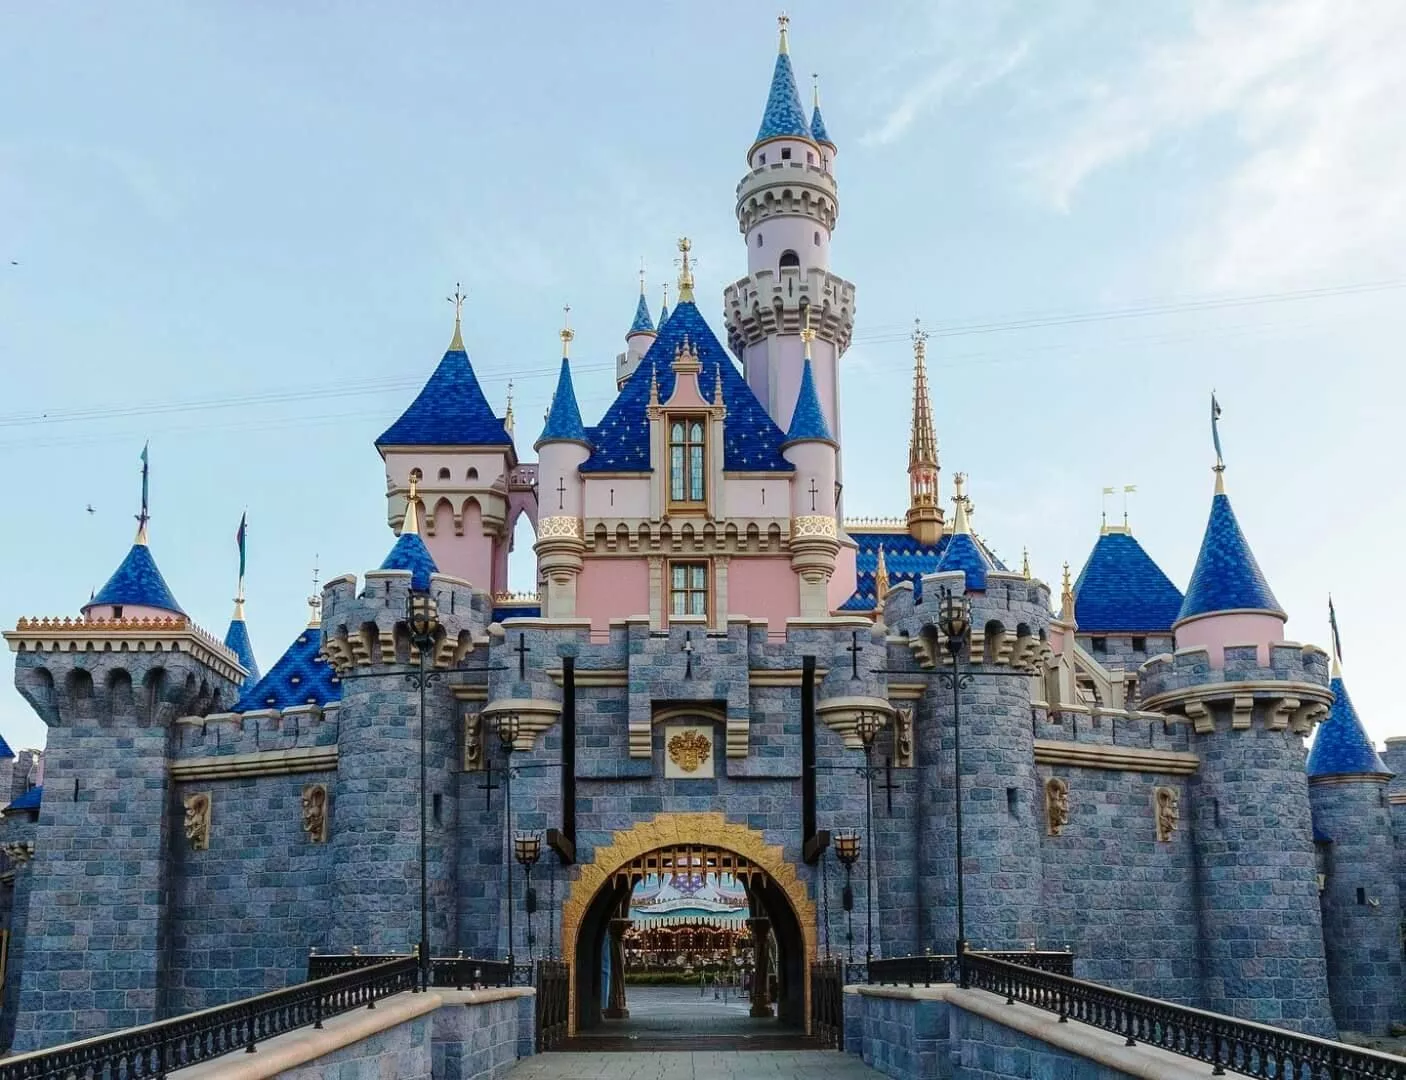 Sleeping Beauty Castle Walkthrough in USA, North America | Architecture - Rated 3.7